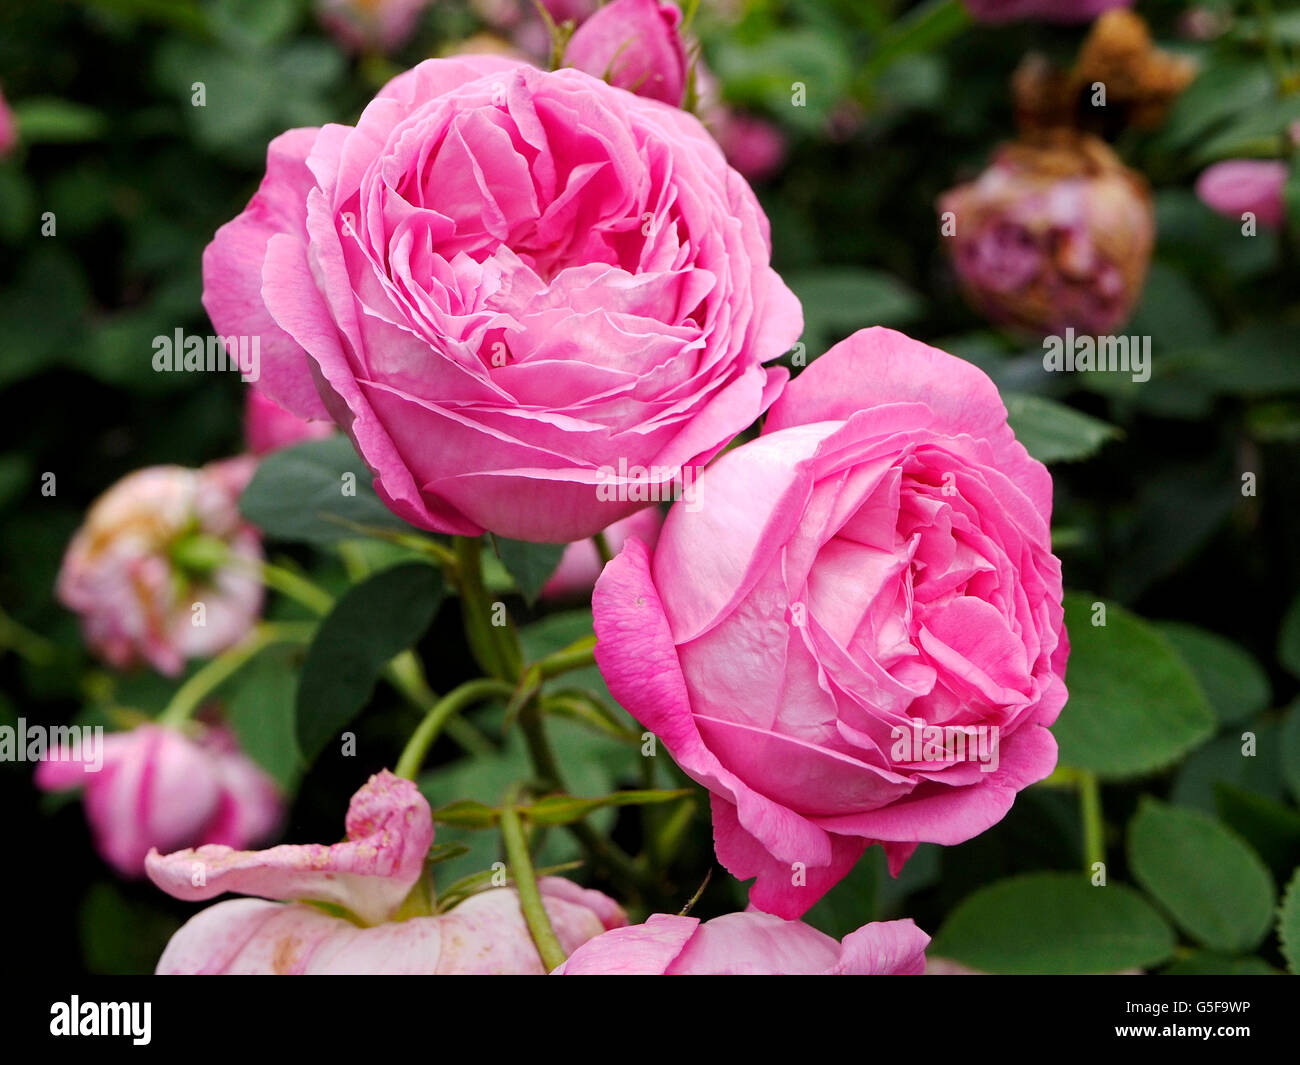 Two large pink rose flowers battered by the English weather with fading flower heads surrounding them. Stock Photo